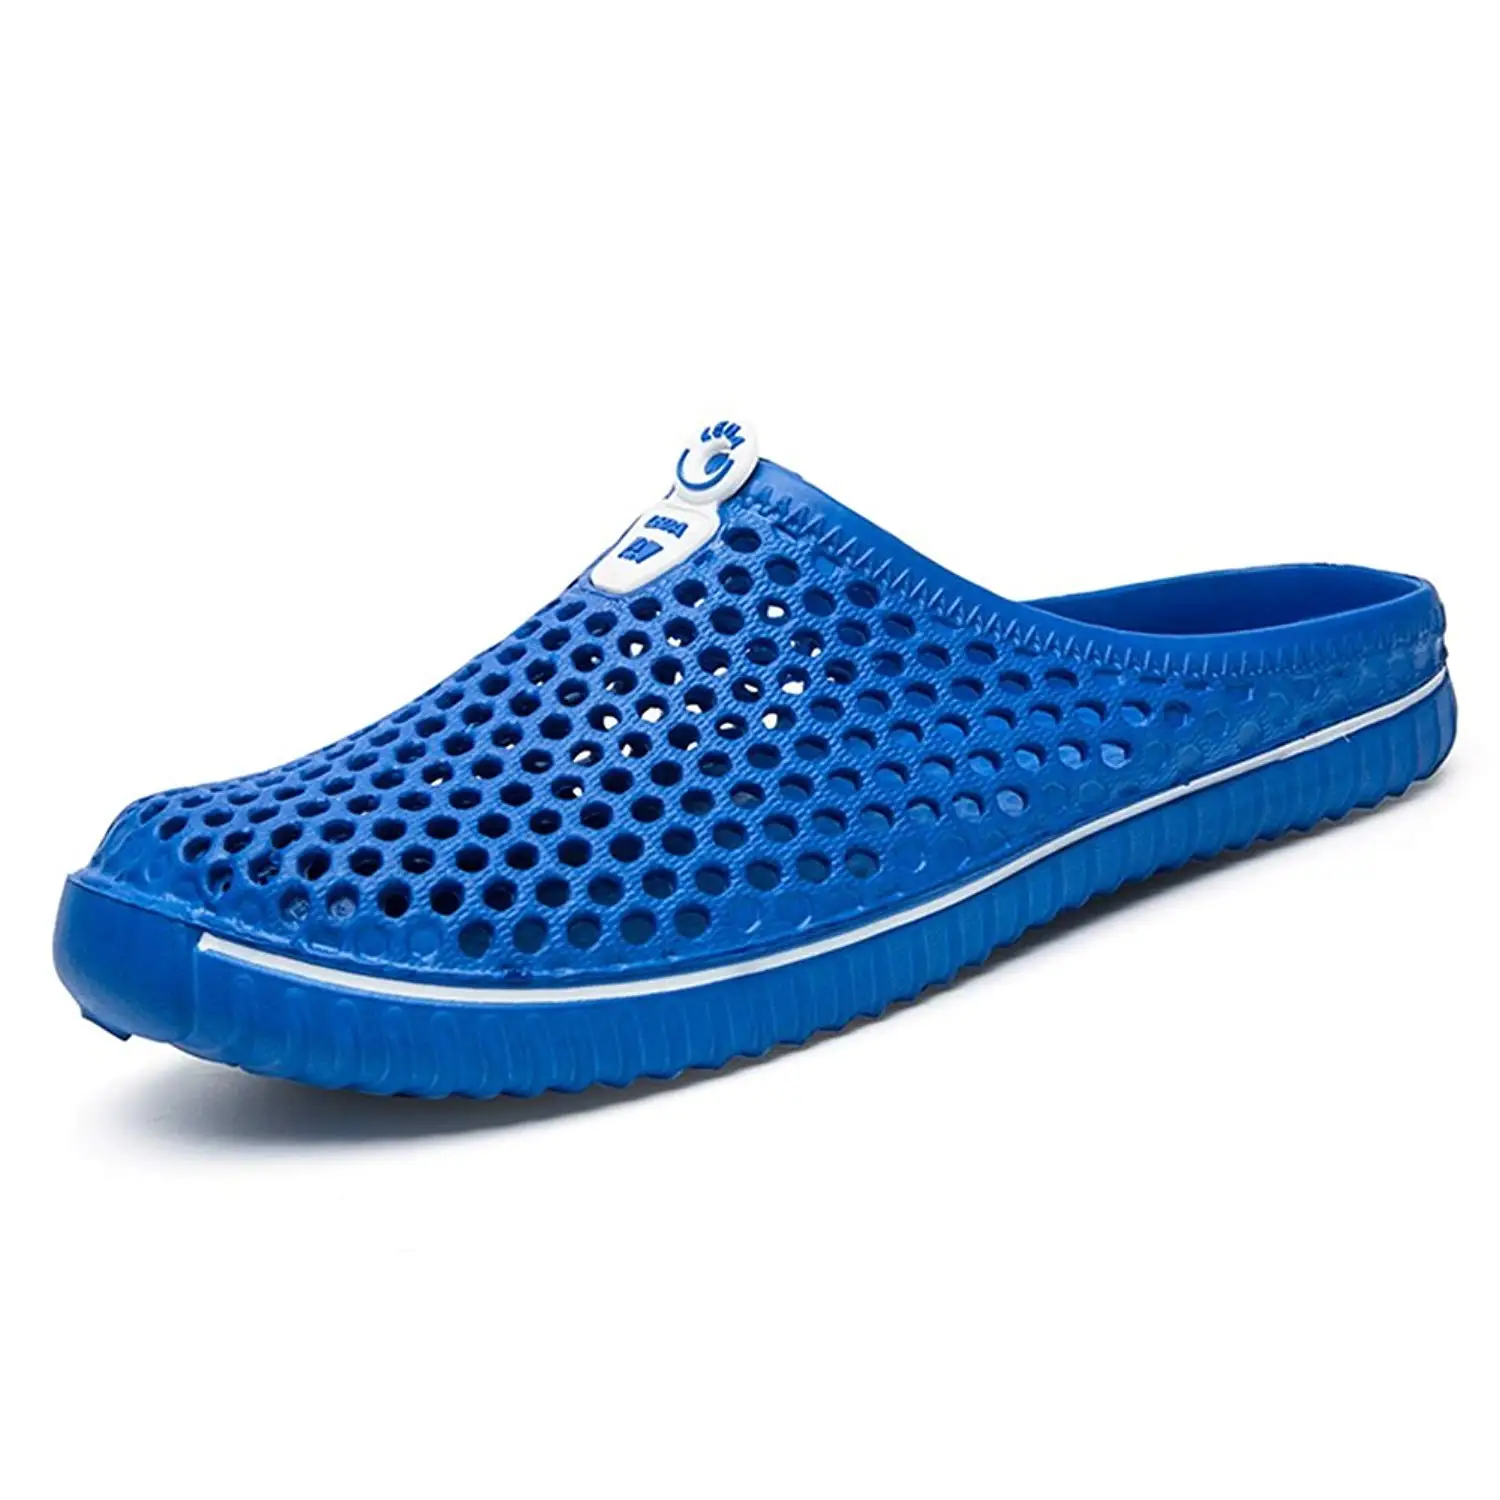 Cheap Shoes Rafting, find Shoes Rafting deals on line at Alibaba.com